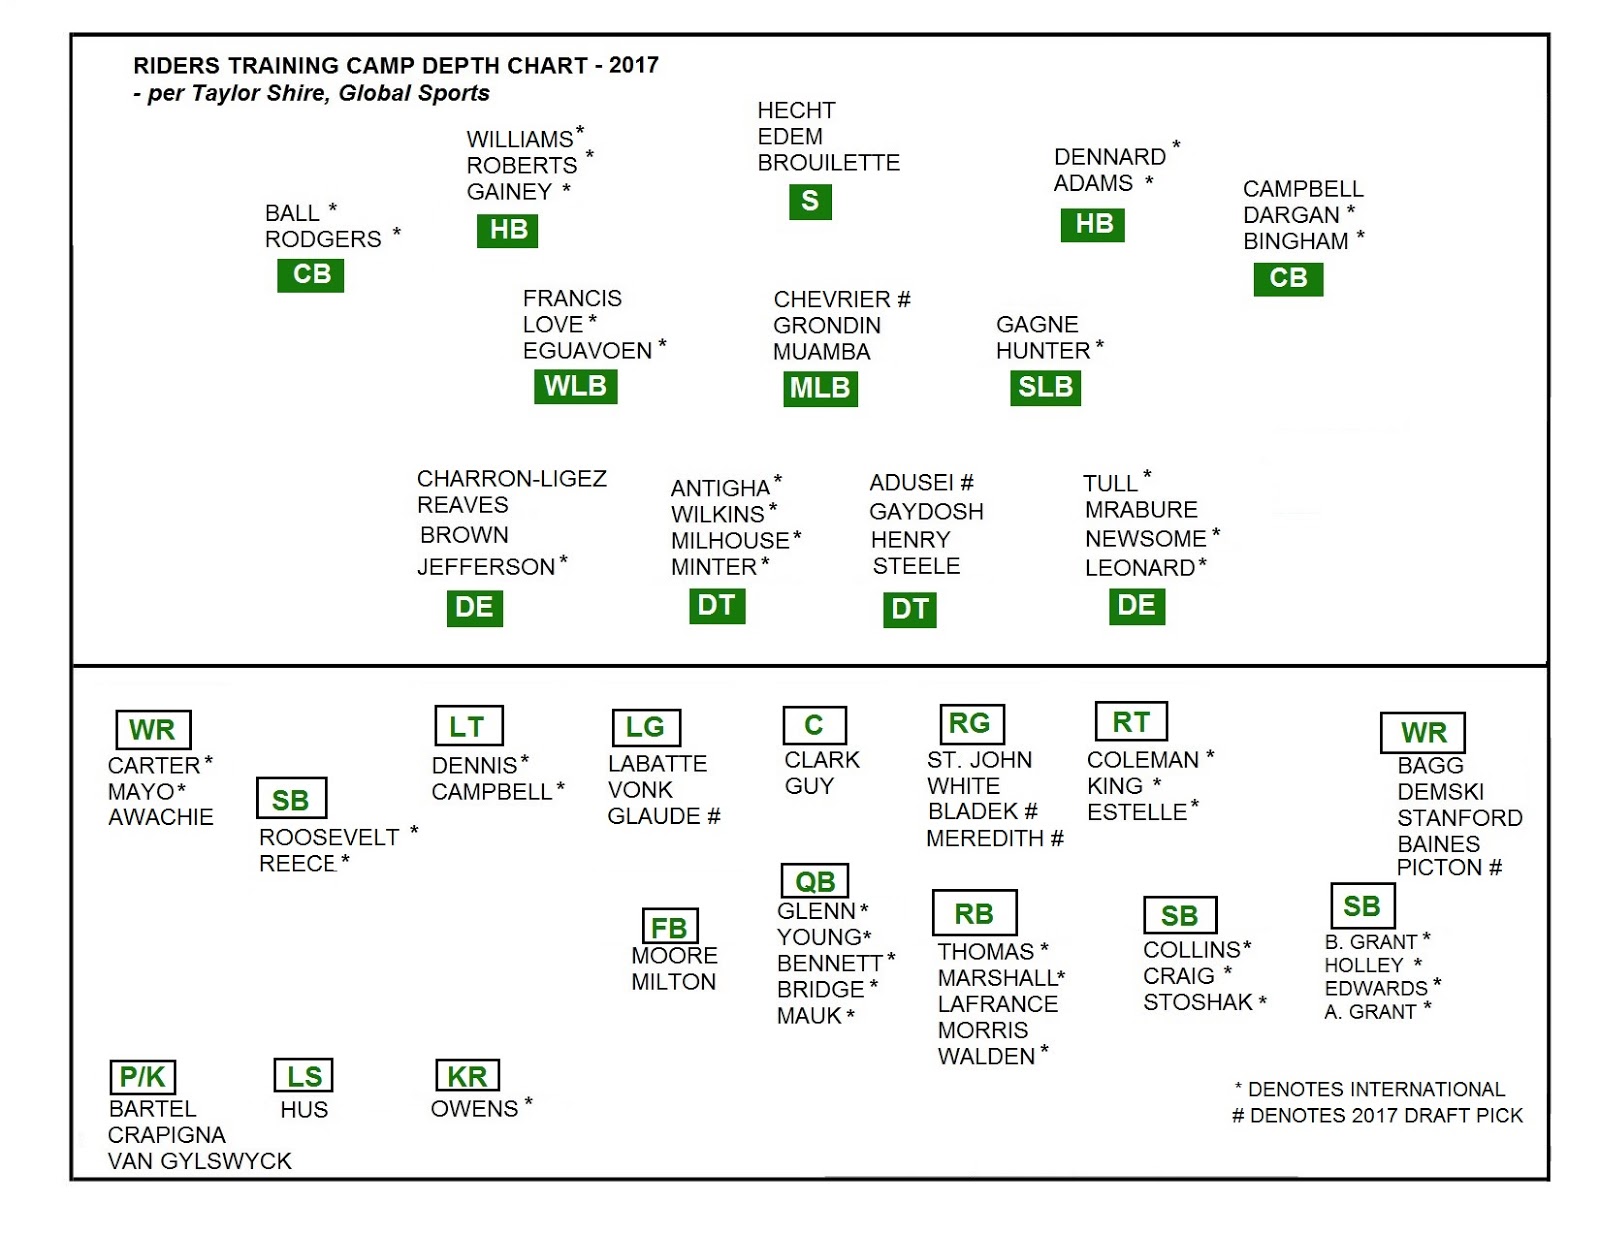 Roughriders Depth Chart